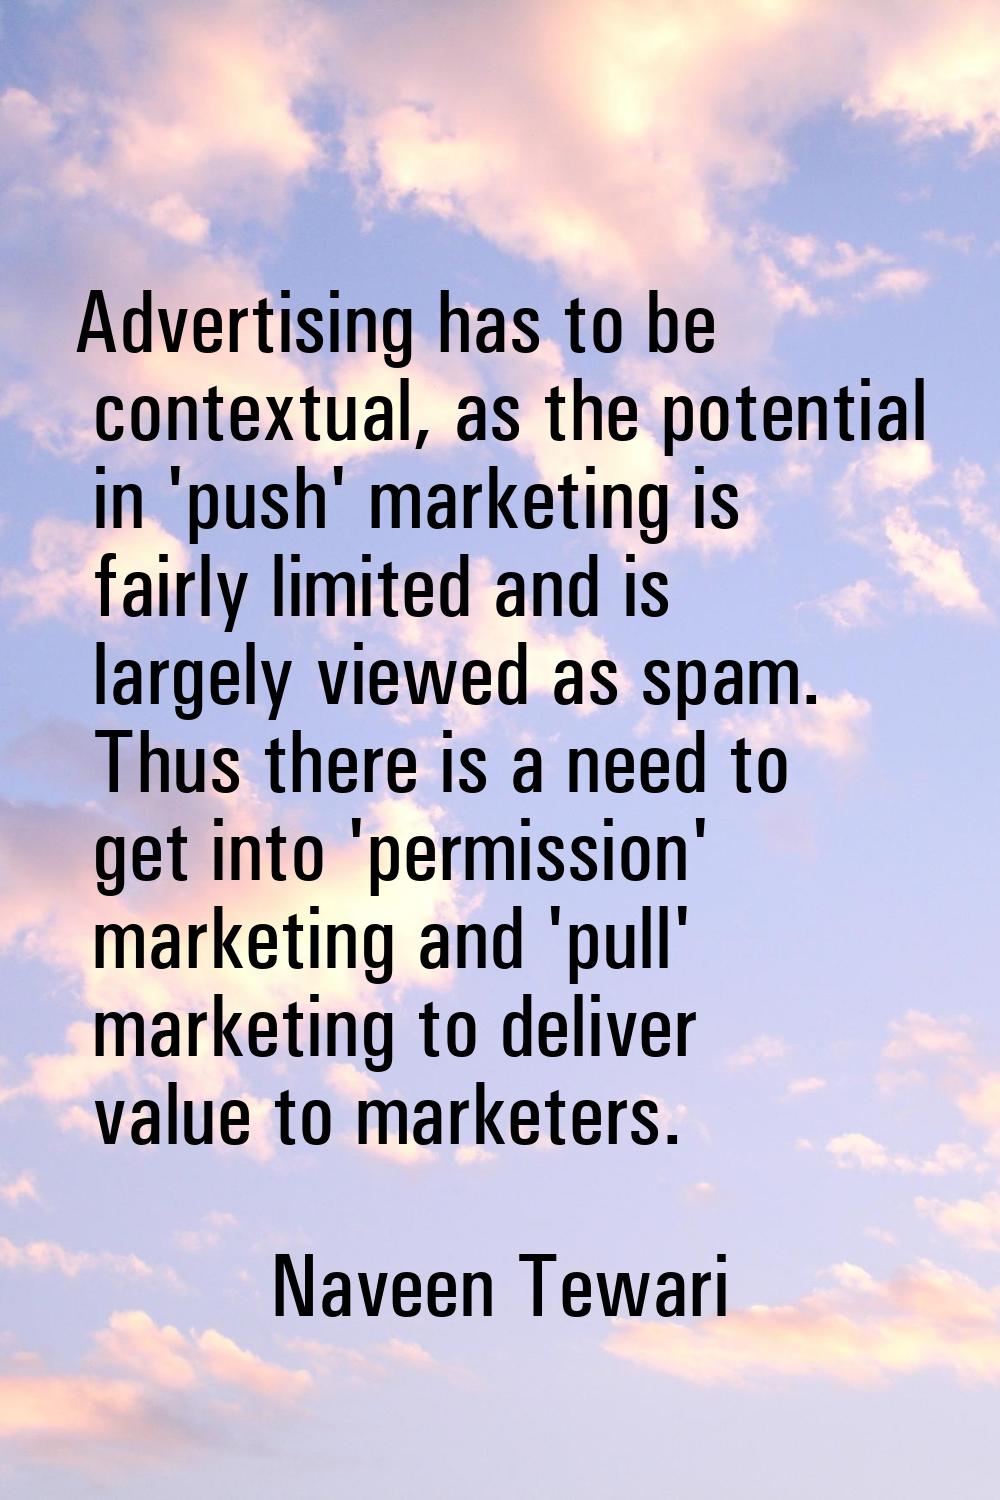 Advertising has to be contextual, as the potential in 'push' marketing is fairly limited and is lar